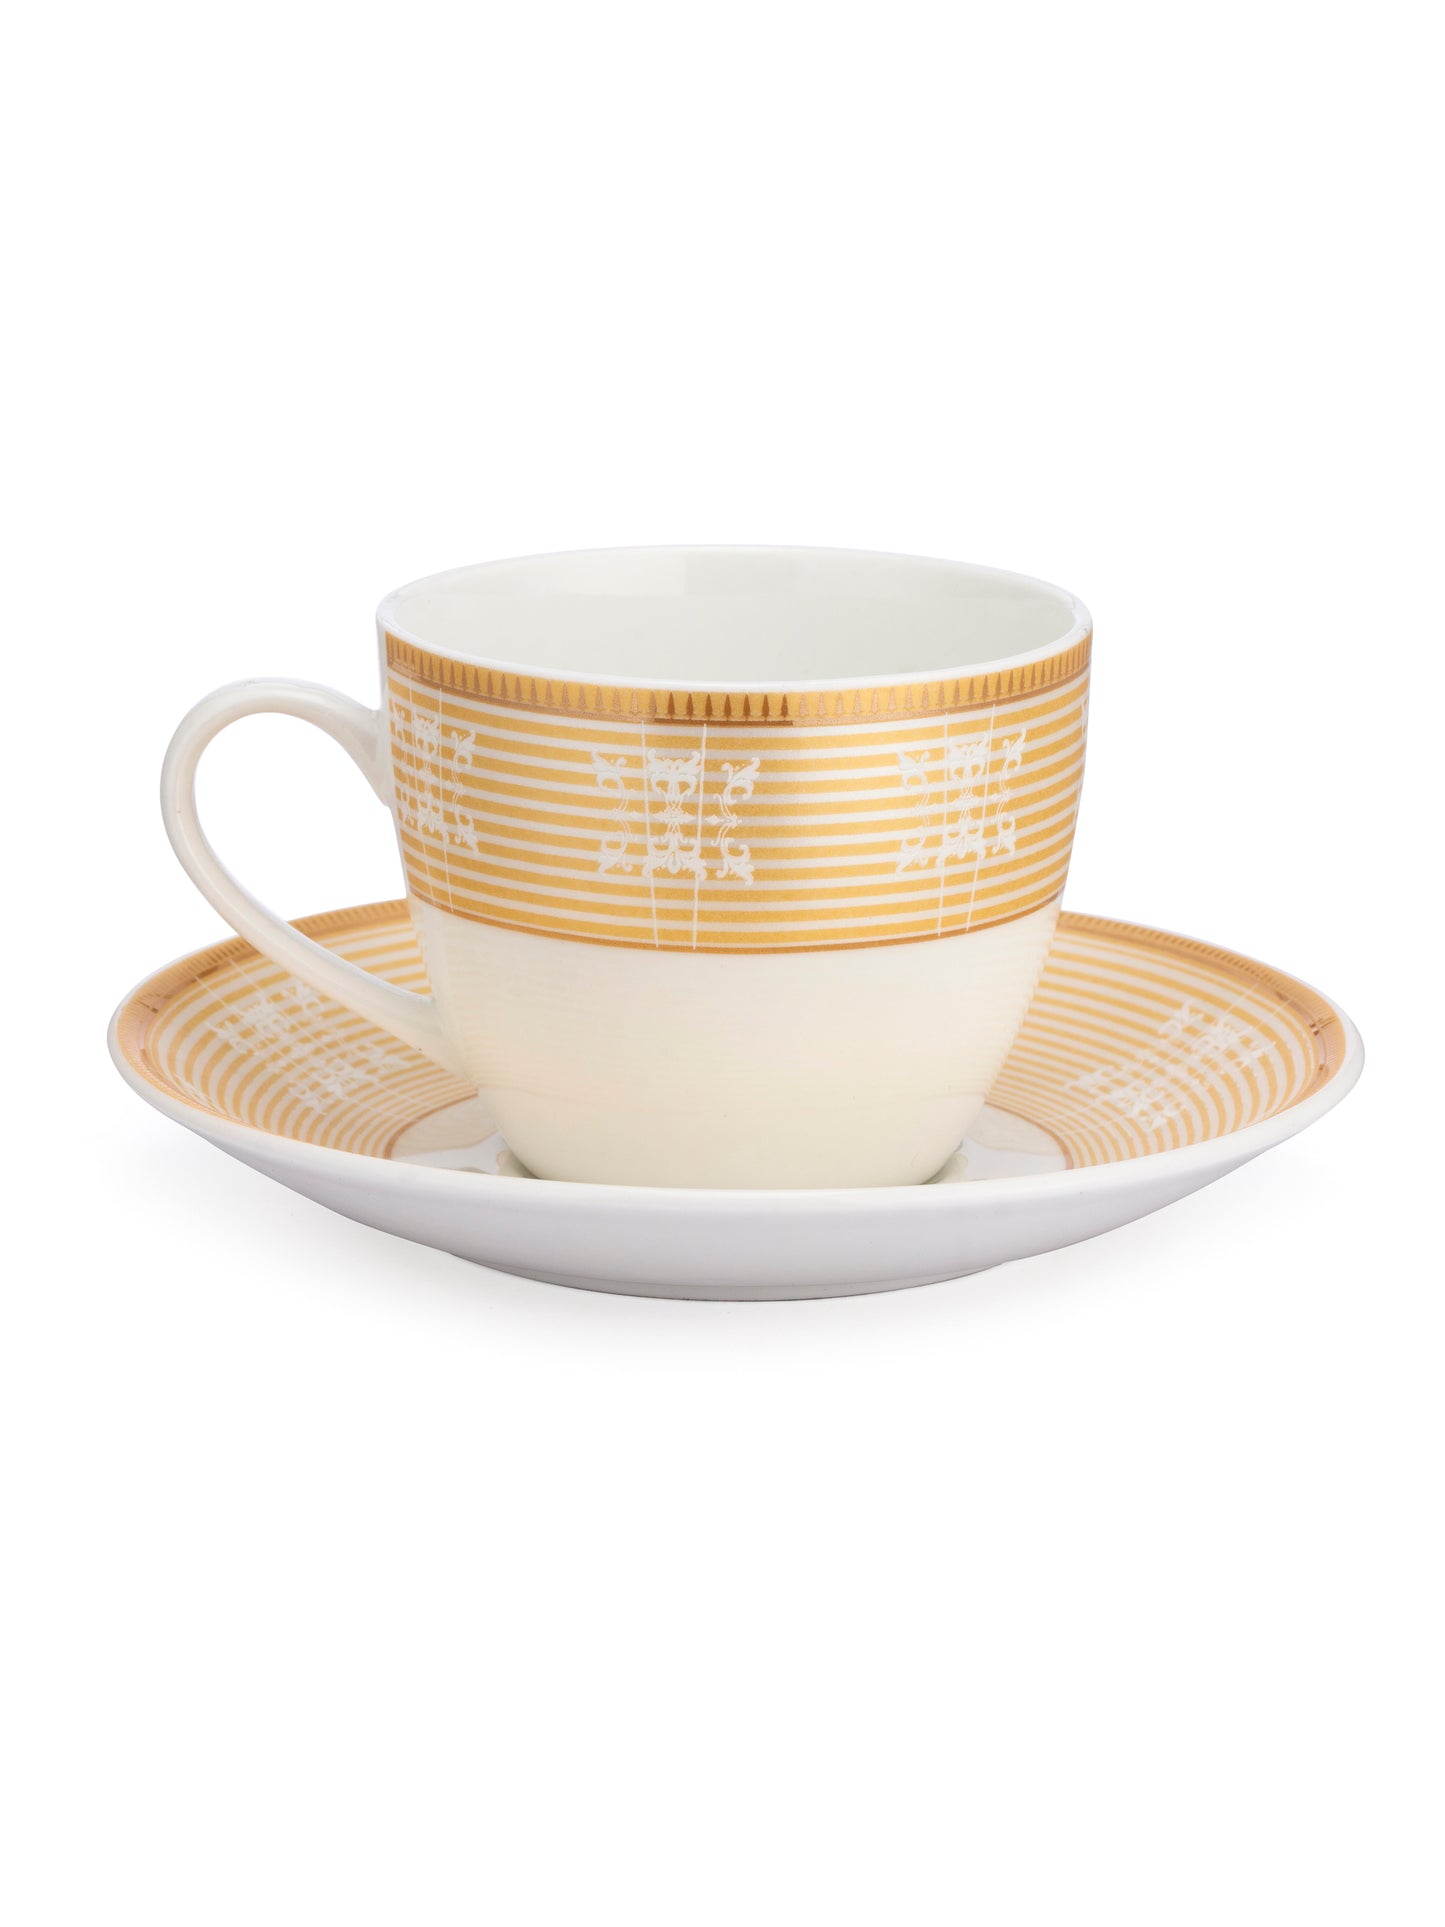 Cream Super Cup & Saucer, 170ml, Set of 12 (6 Cups + 6 Saucers) (S304)